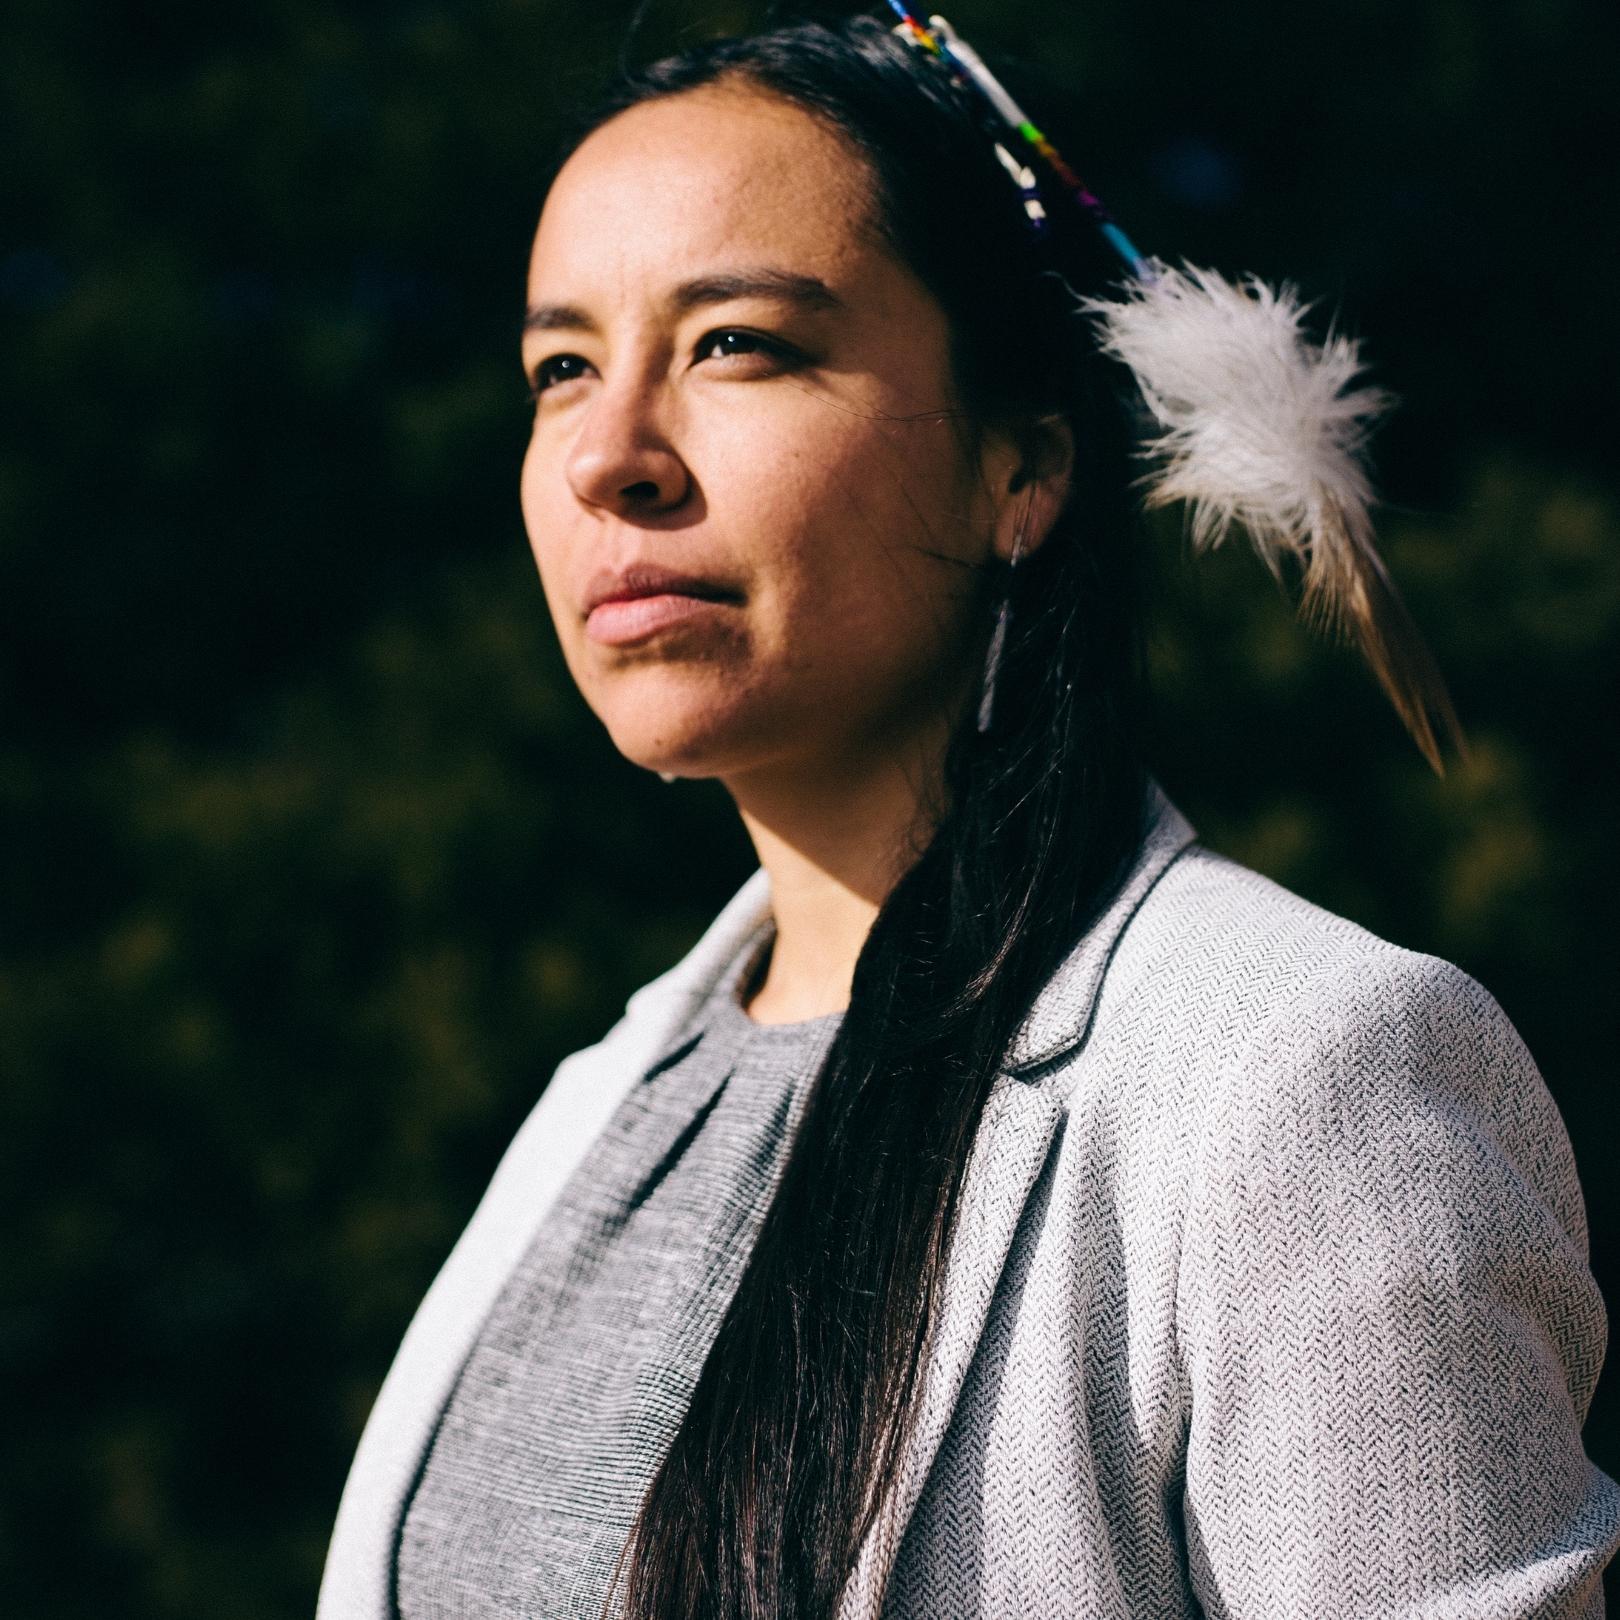 A picture of a Native American woman, Lyla June, in a gray business suit with a feather in her hair.